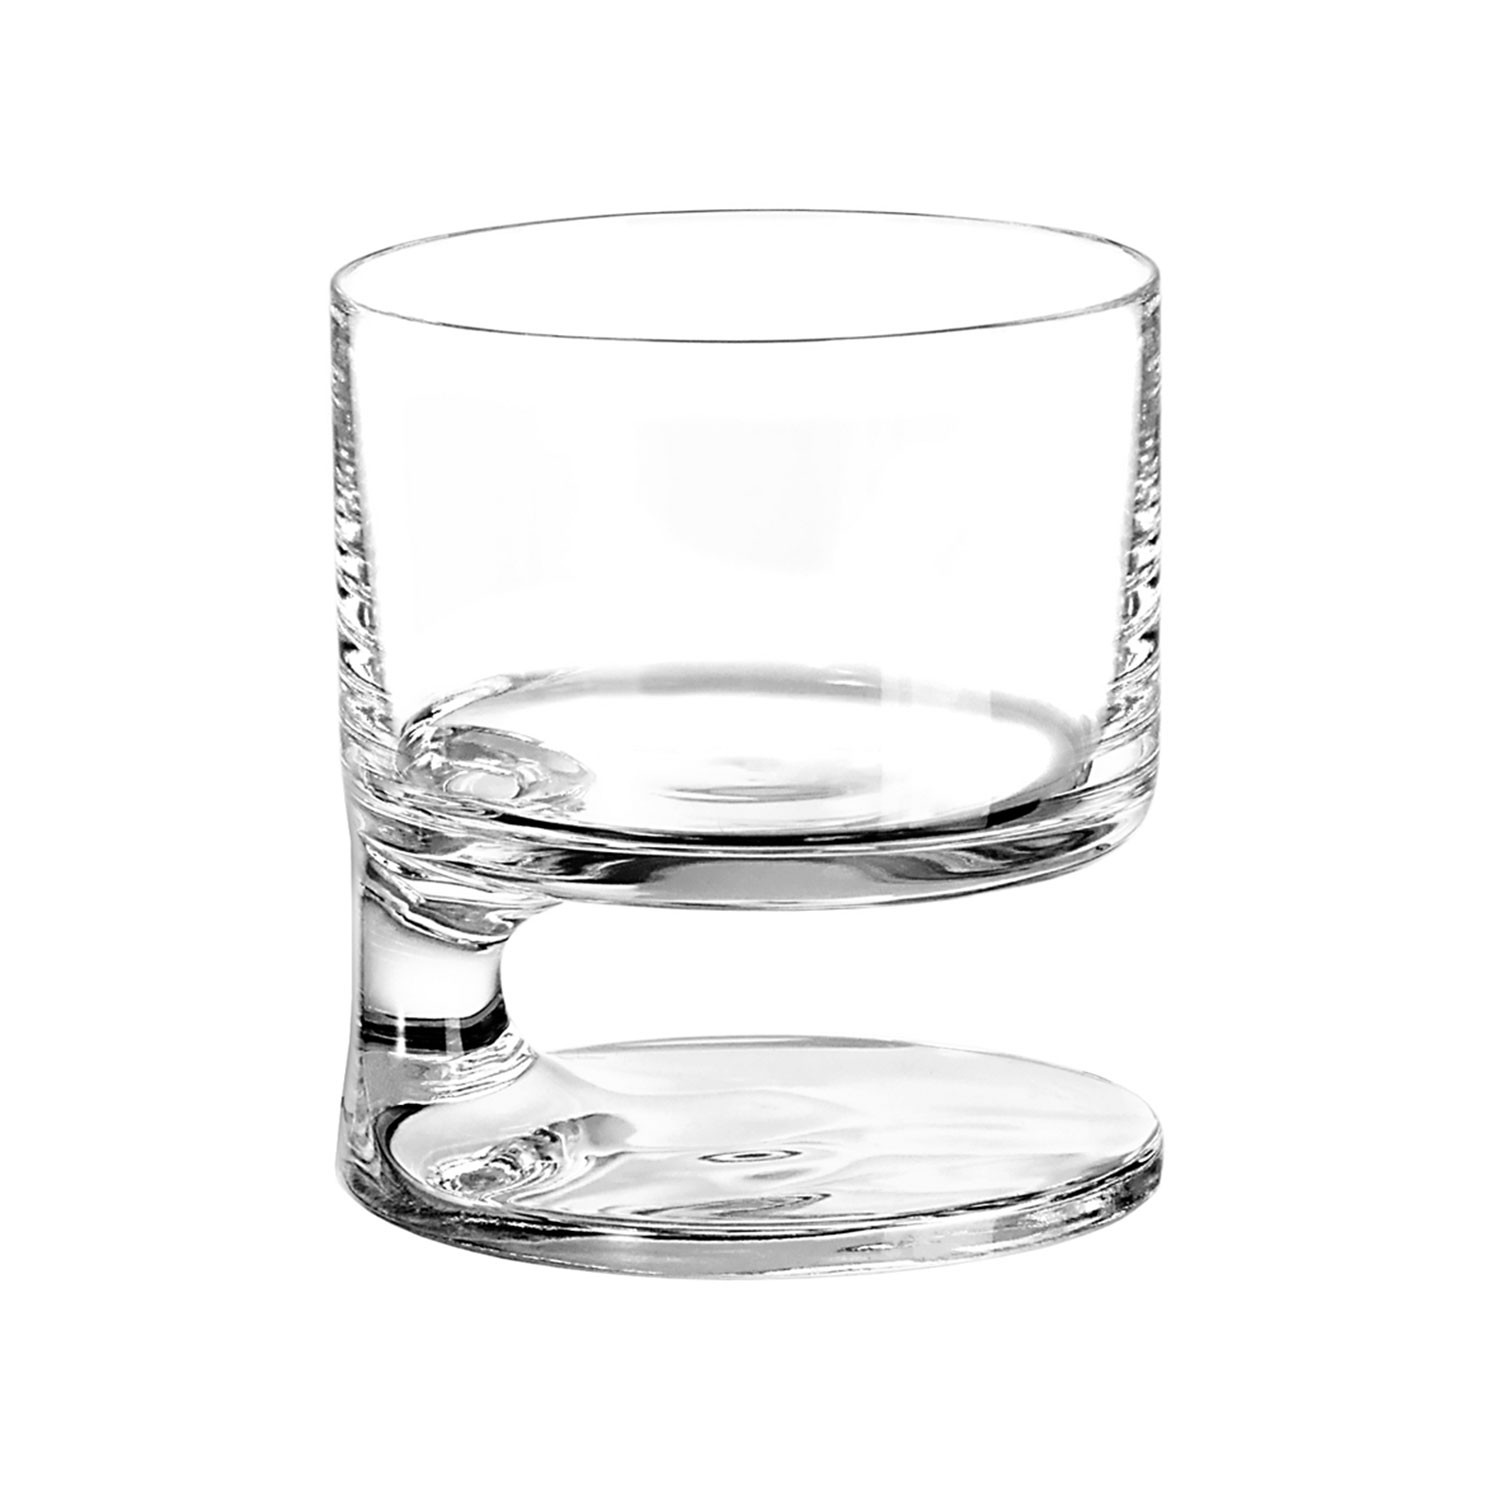 Cibi Double Old Fashioned glass – The Bladerunner glass - 1 pz 37 Cl – H 93  Ø 82 - Blade Runner Glass